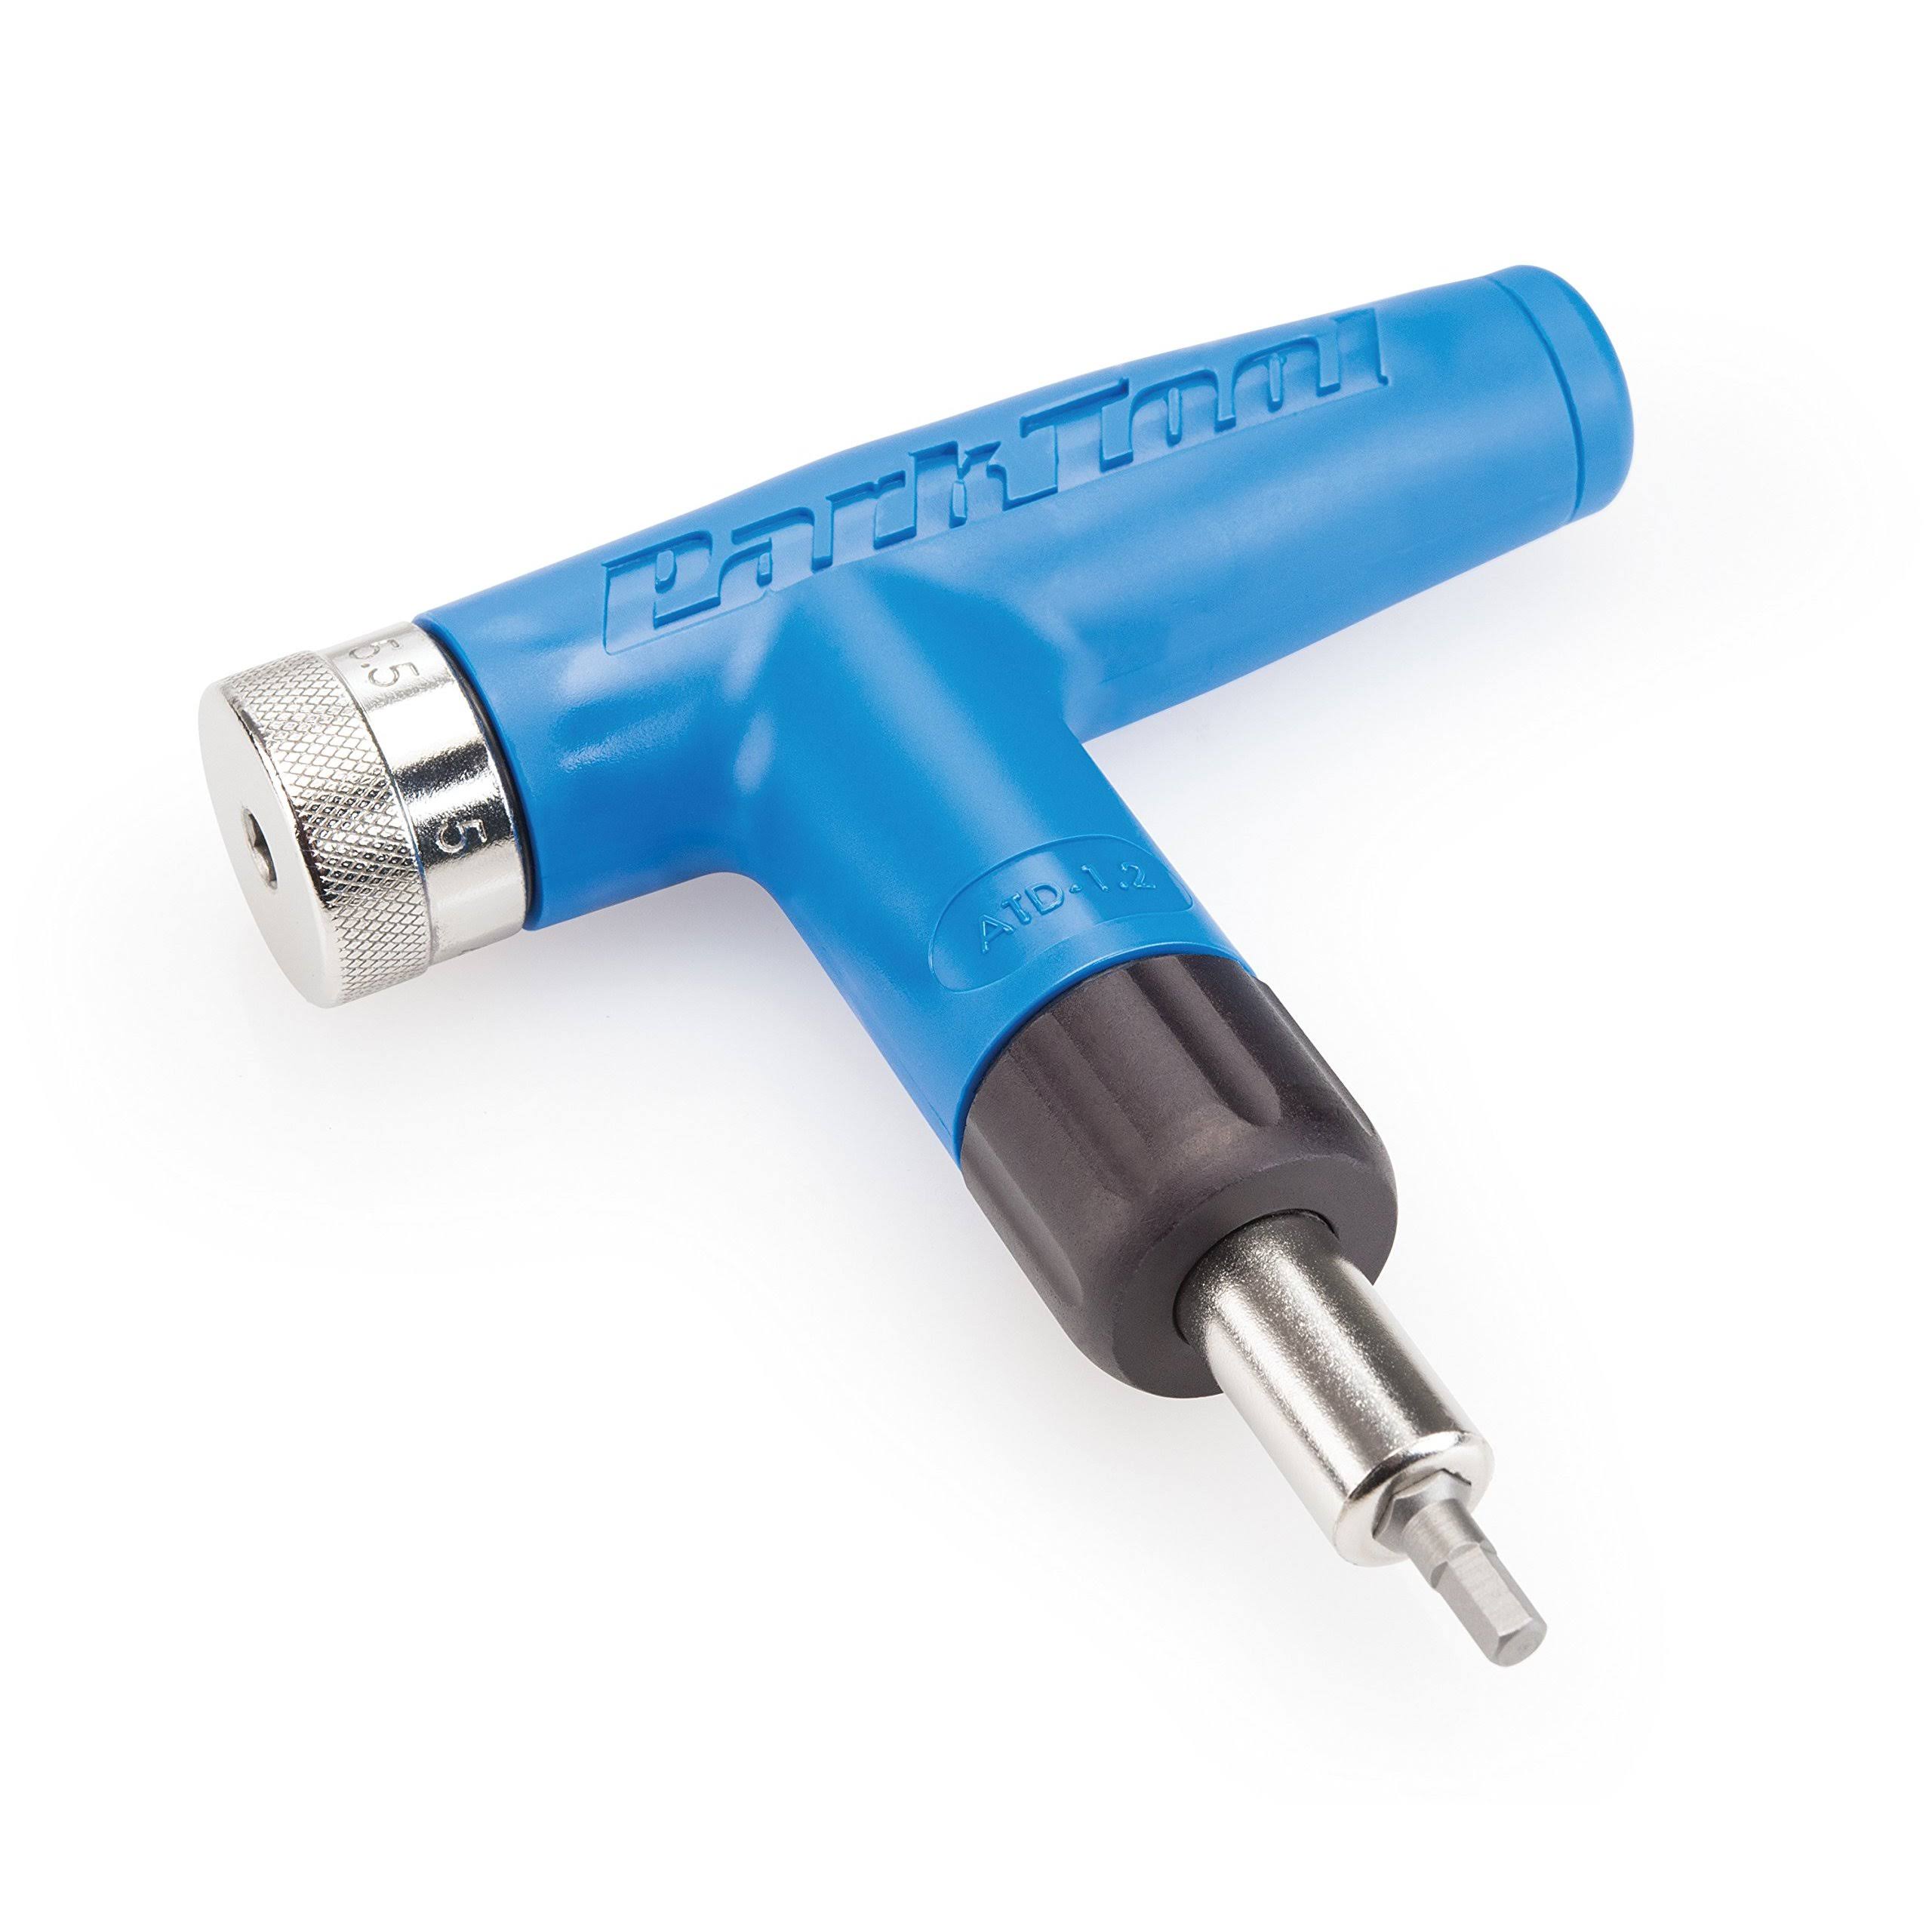 Park Tool ATD1.2 Torque Wrench - Blue, 4 to 6nm, Hex 3,4,5